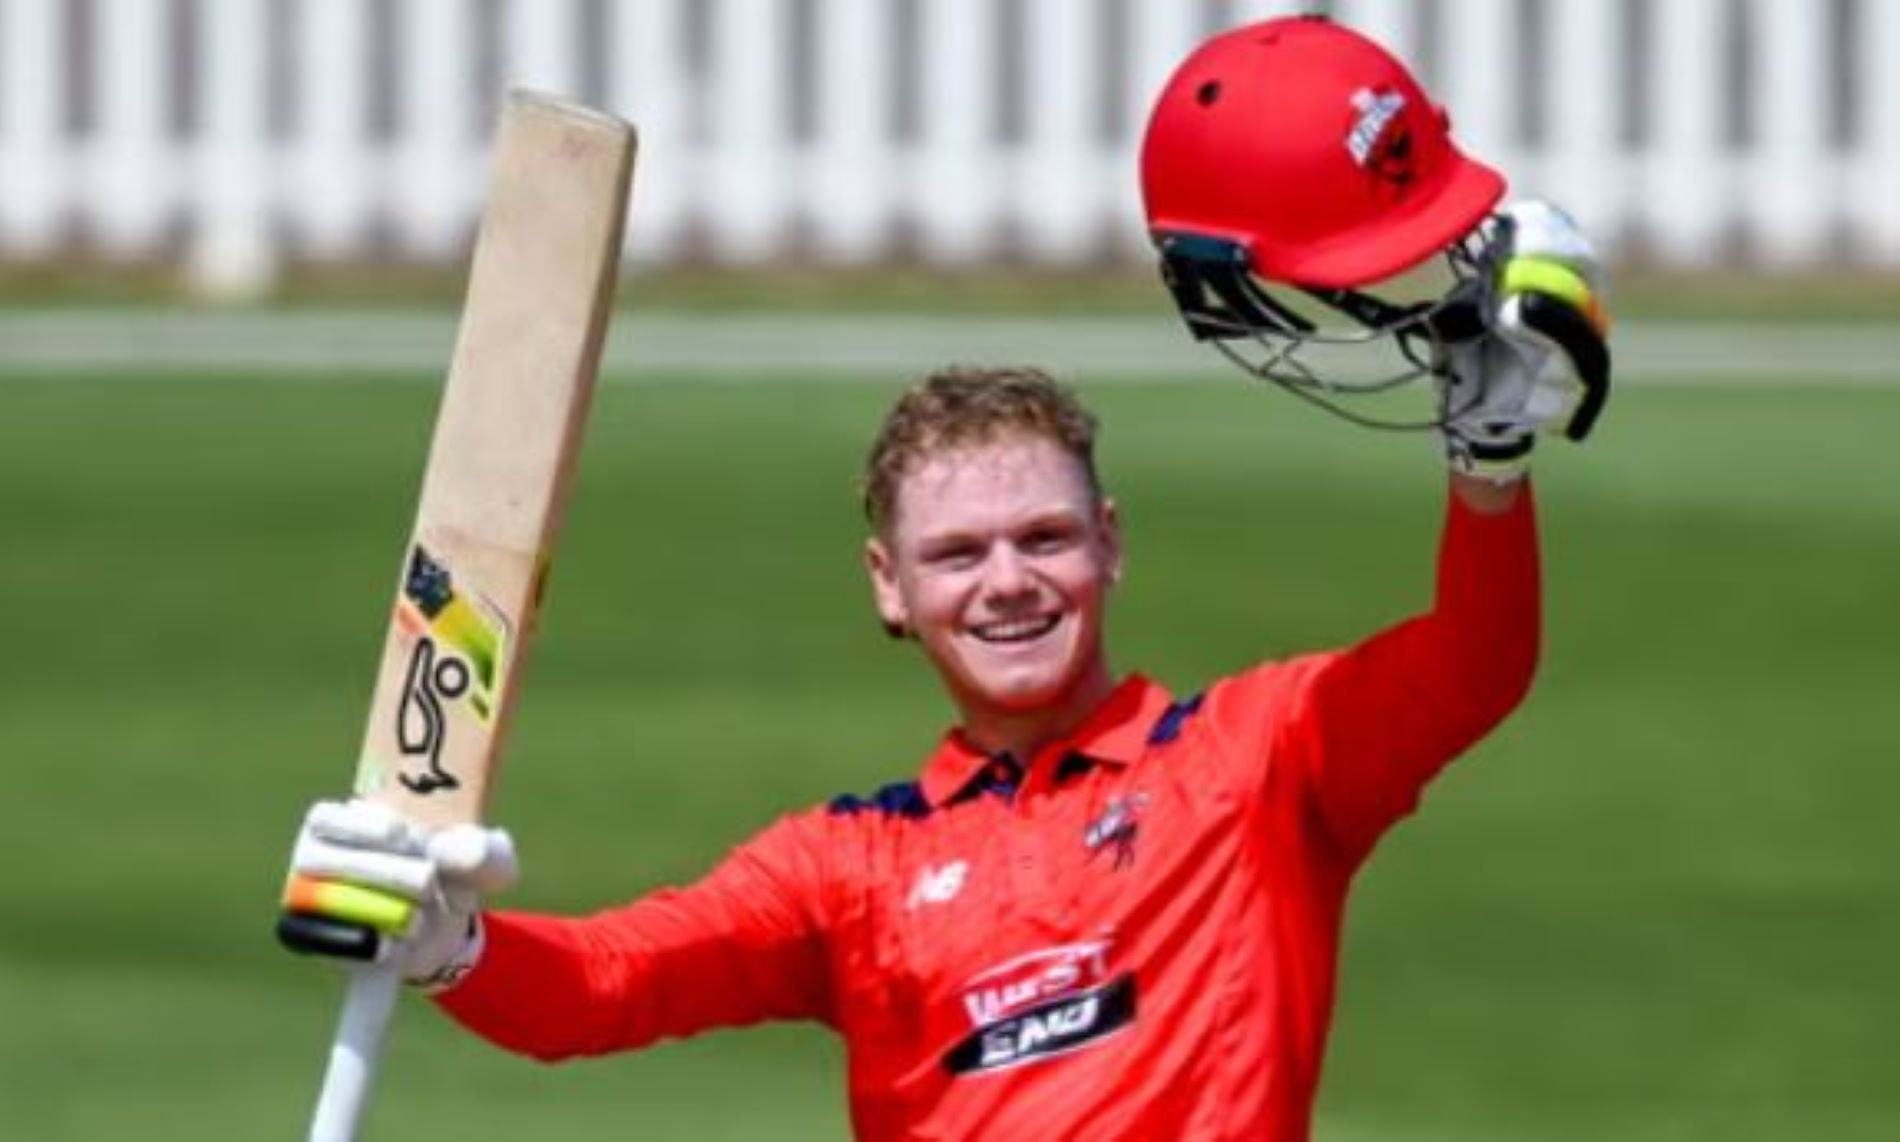 McGurk plays for the Melbourne Renegades in the Big Bash League